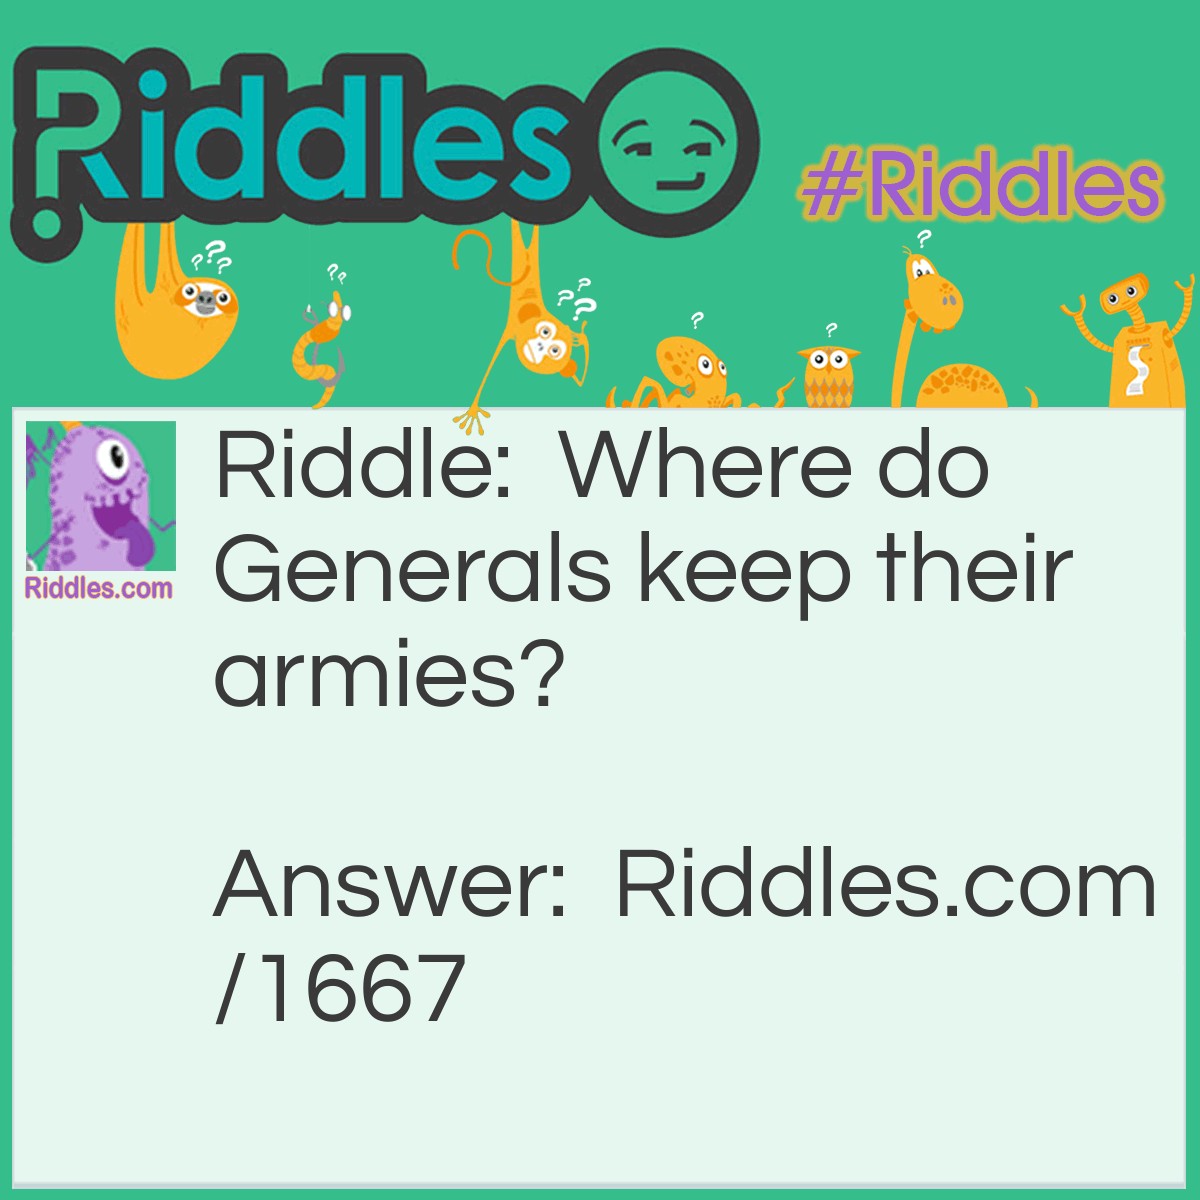 Riddle: Where do Generals keep their armies? Answer: Up their sleevies!